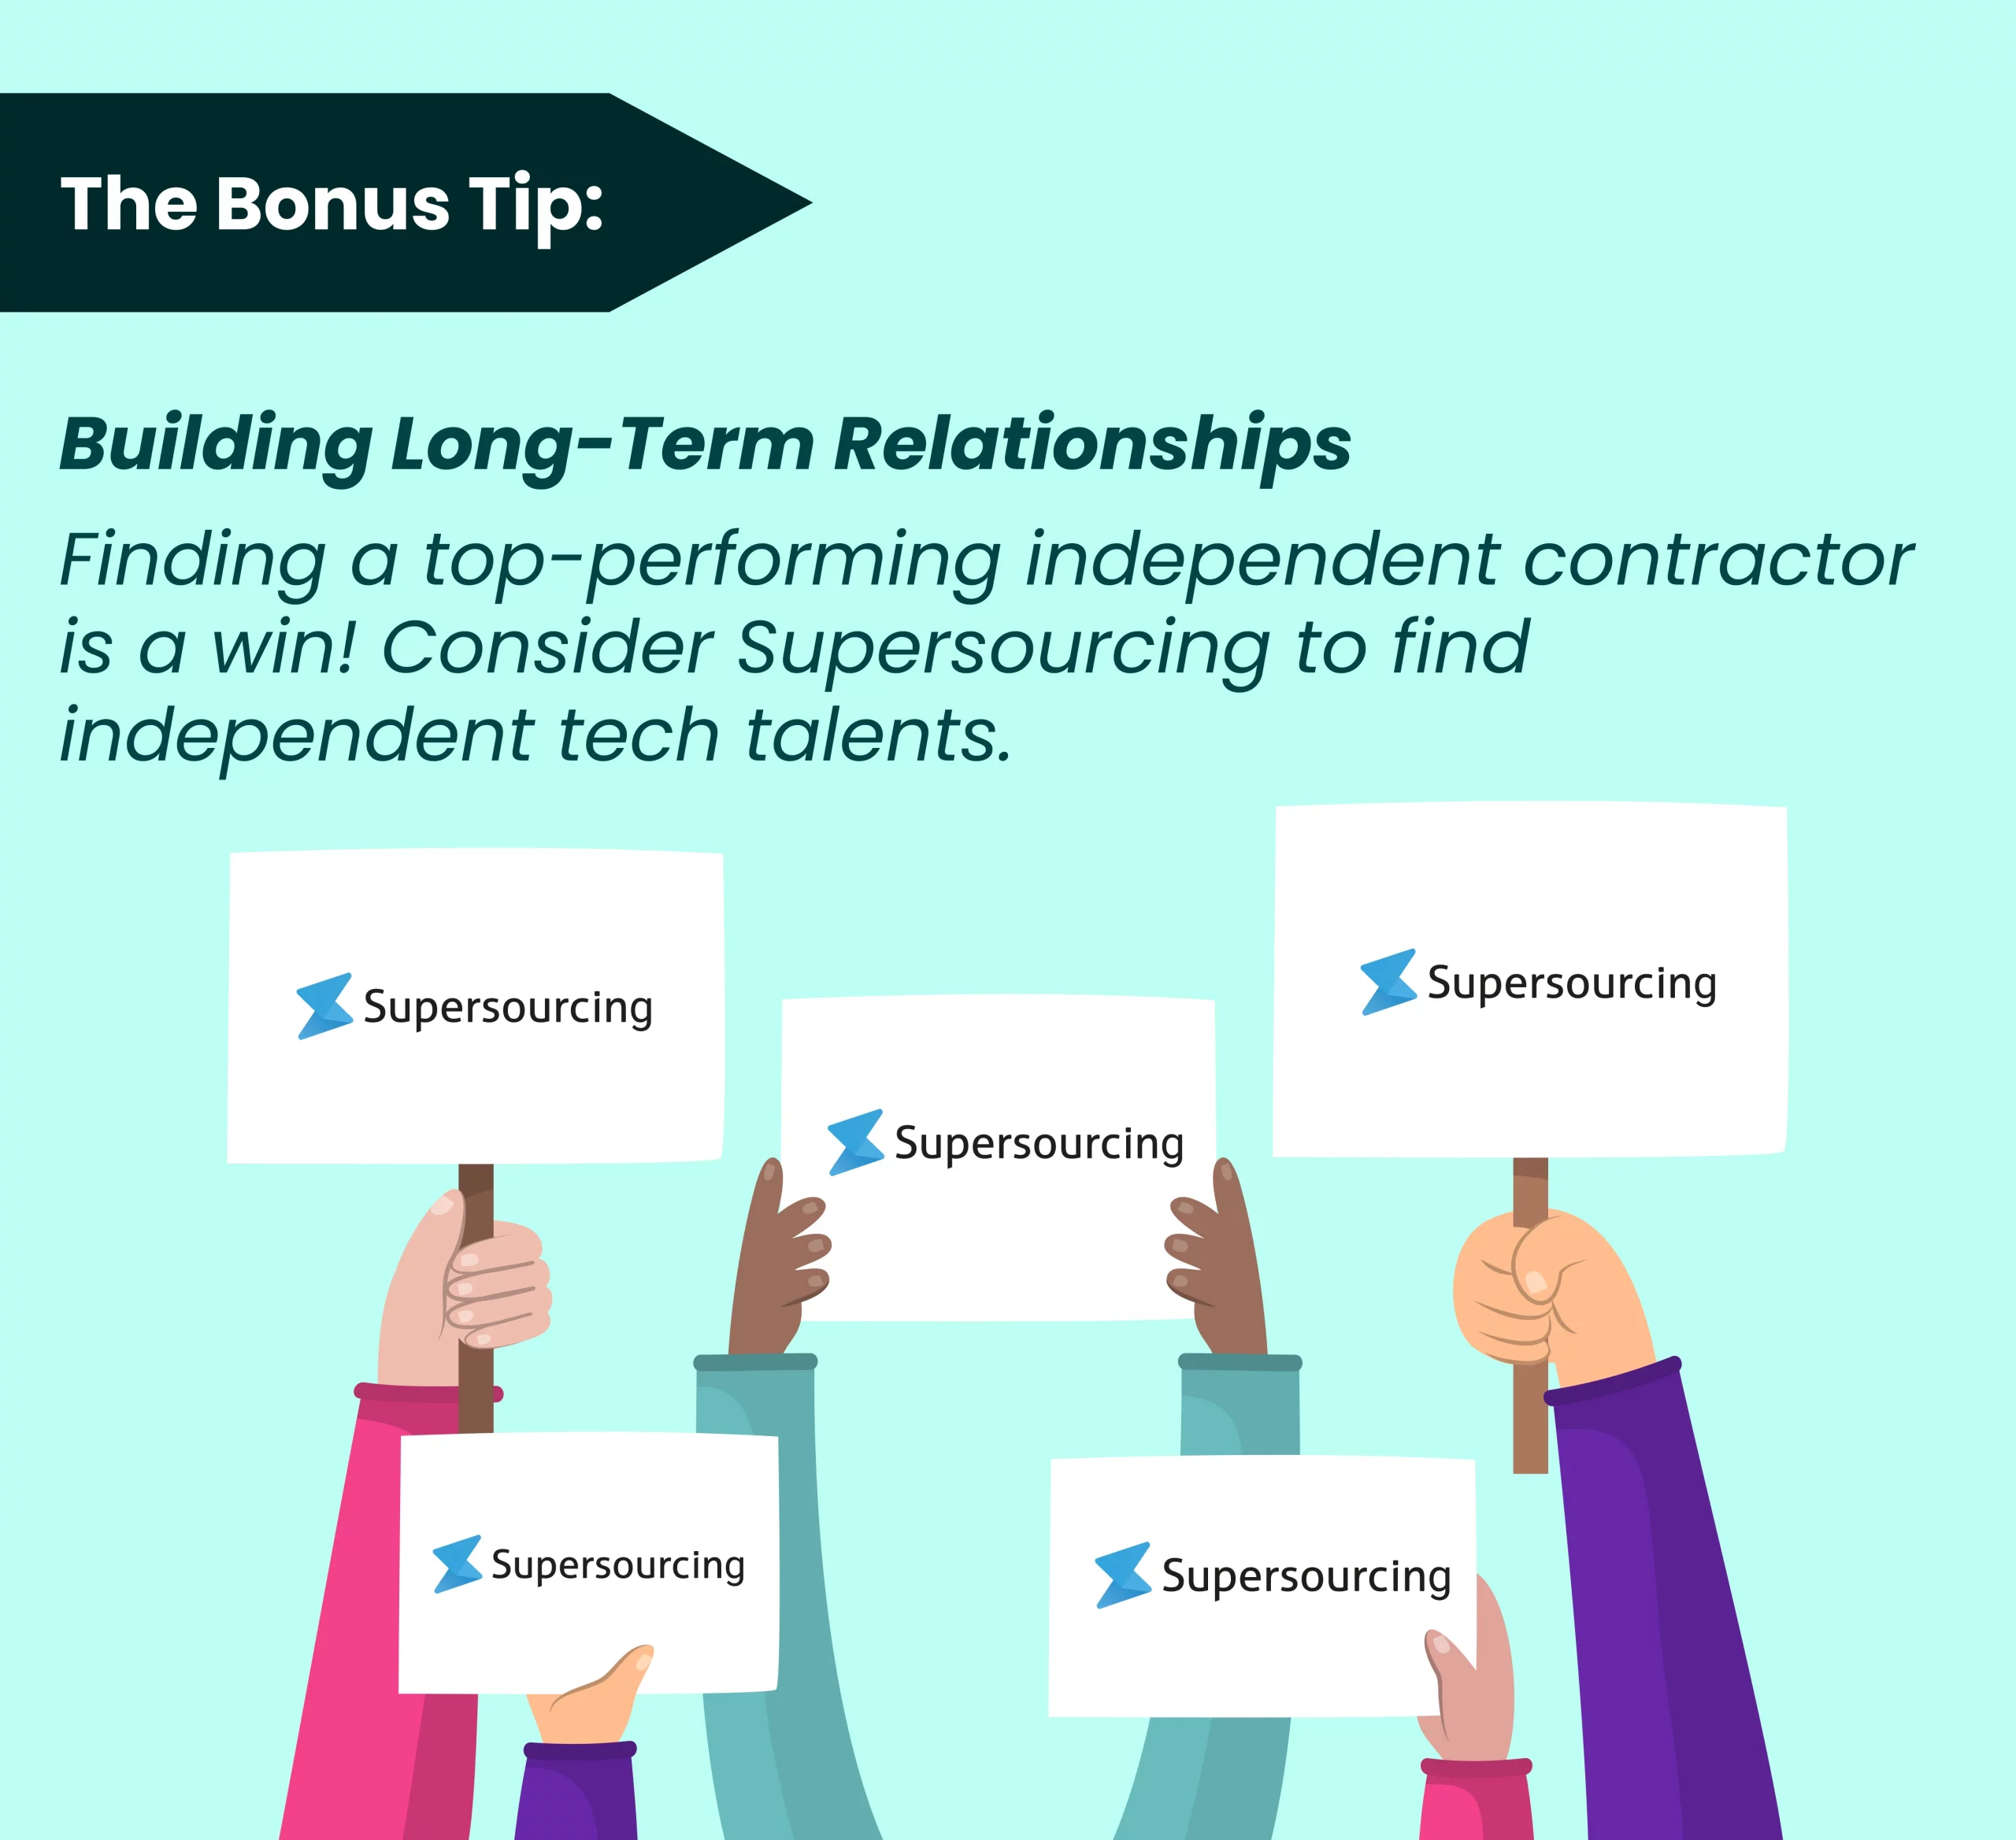  Building Long-Term Relationships with Independent Contractors